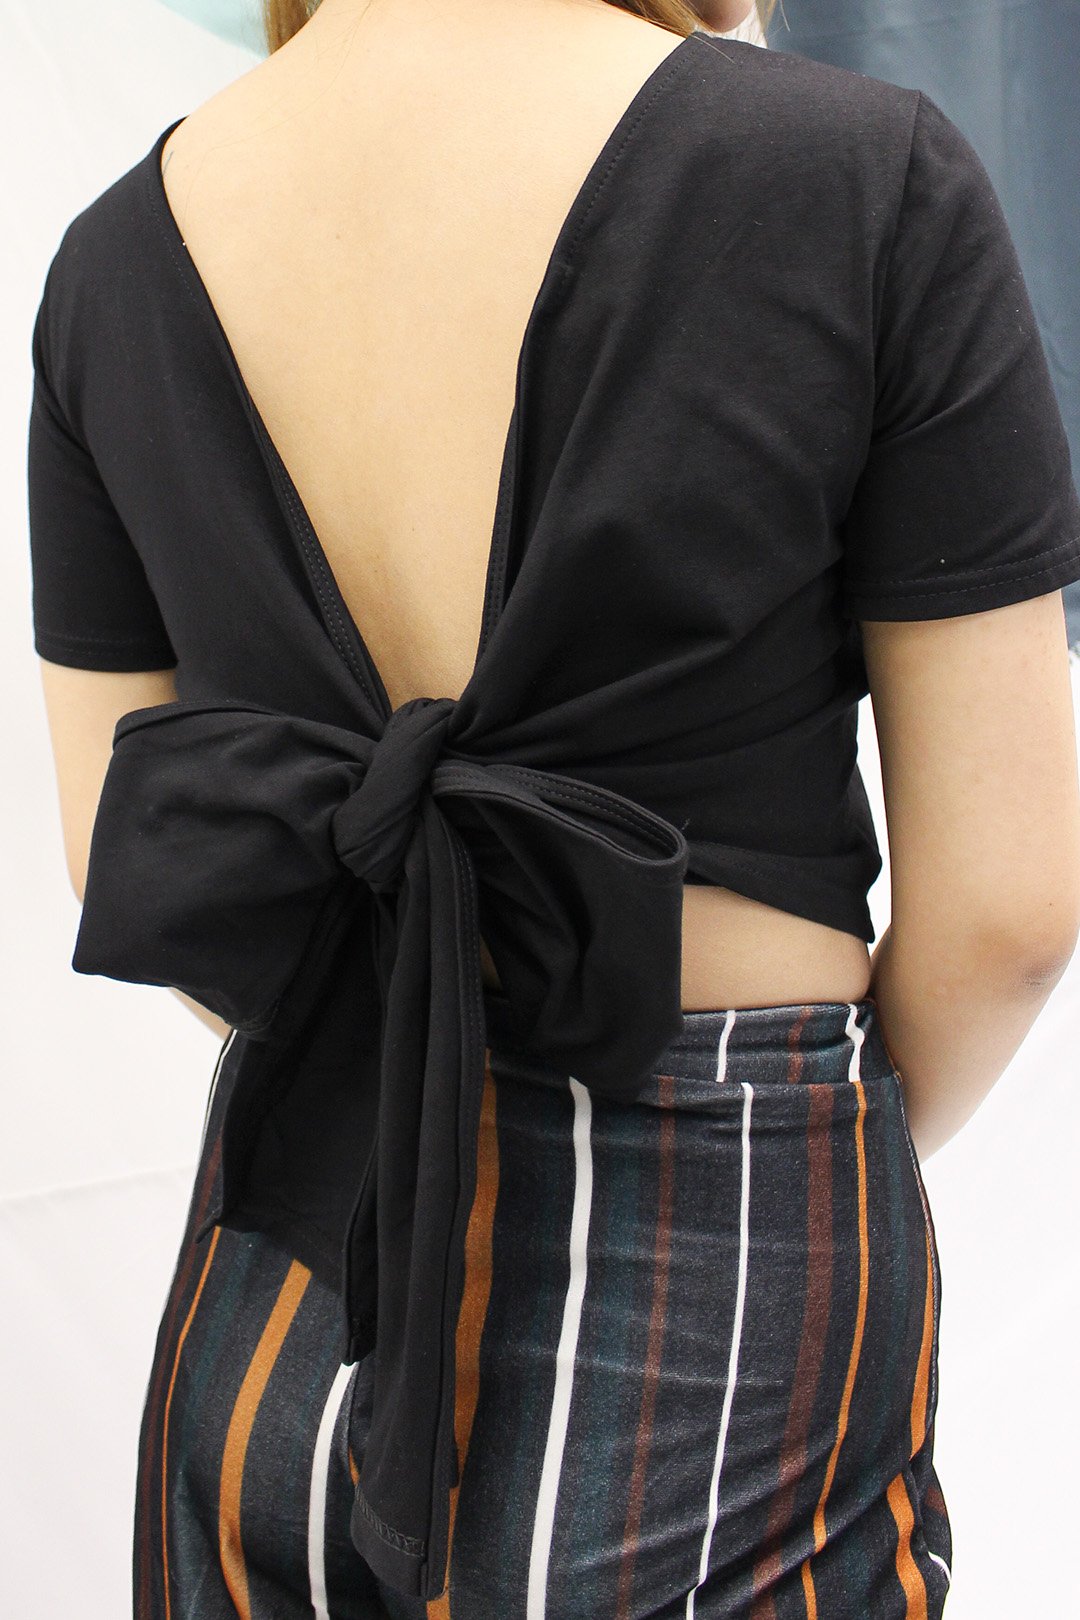 Soft cotton cropped tee with a twist - featuring a bow tie in the back